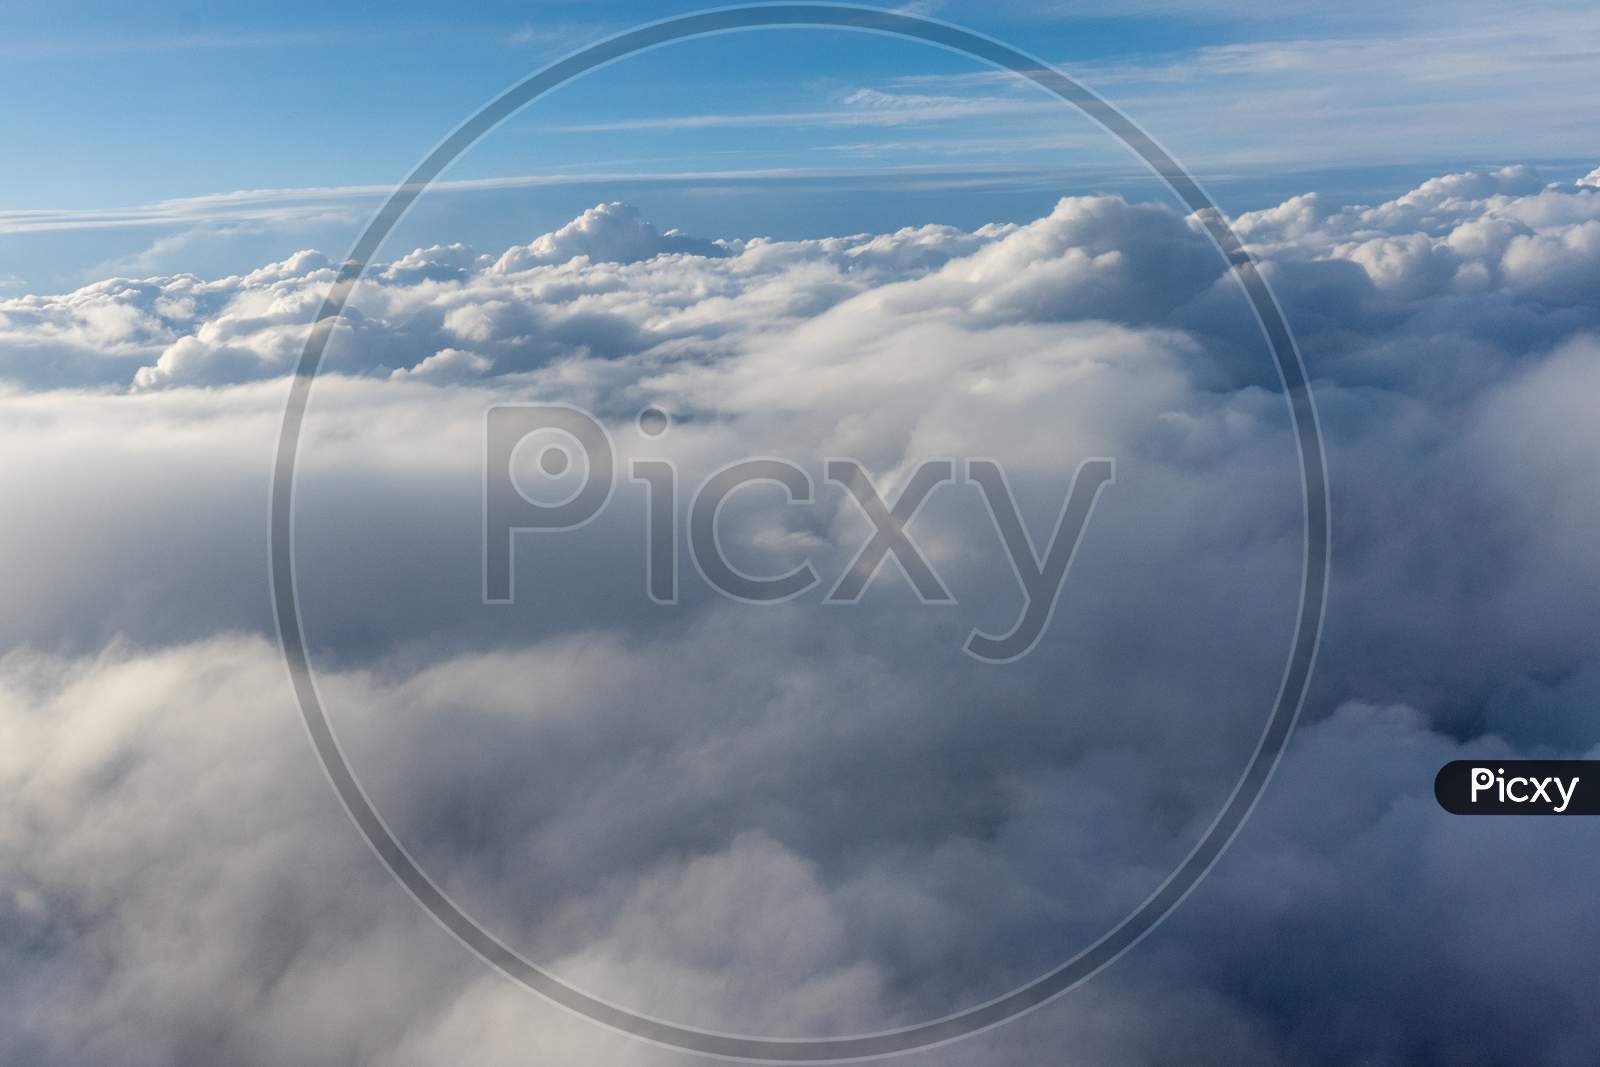 View From The Sky, Cloud, A Plane Flying Through A Cloudy Sky